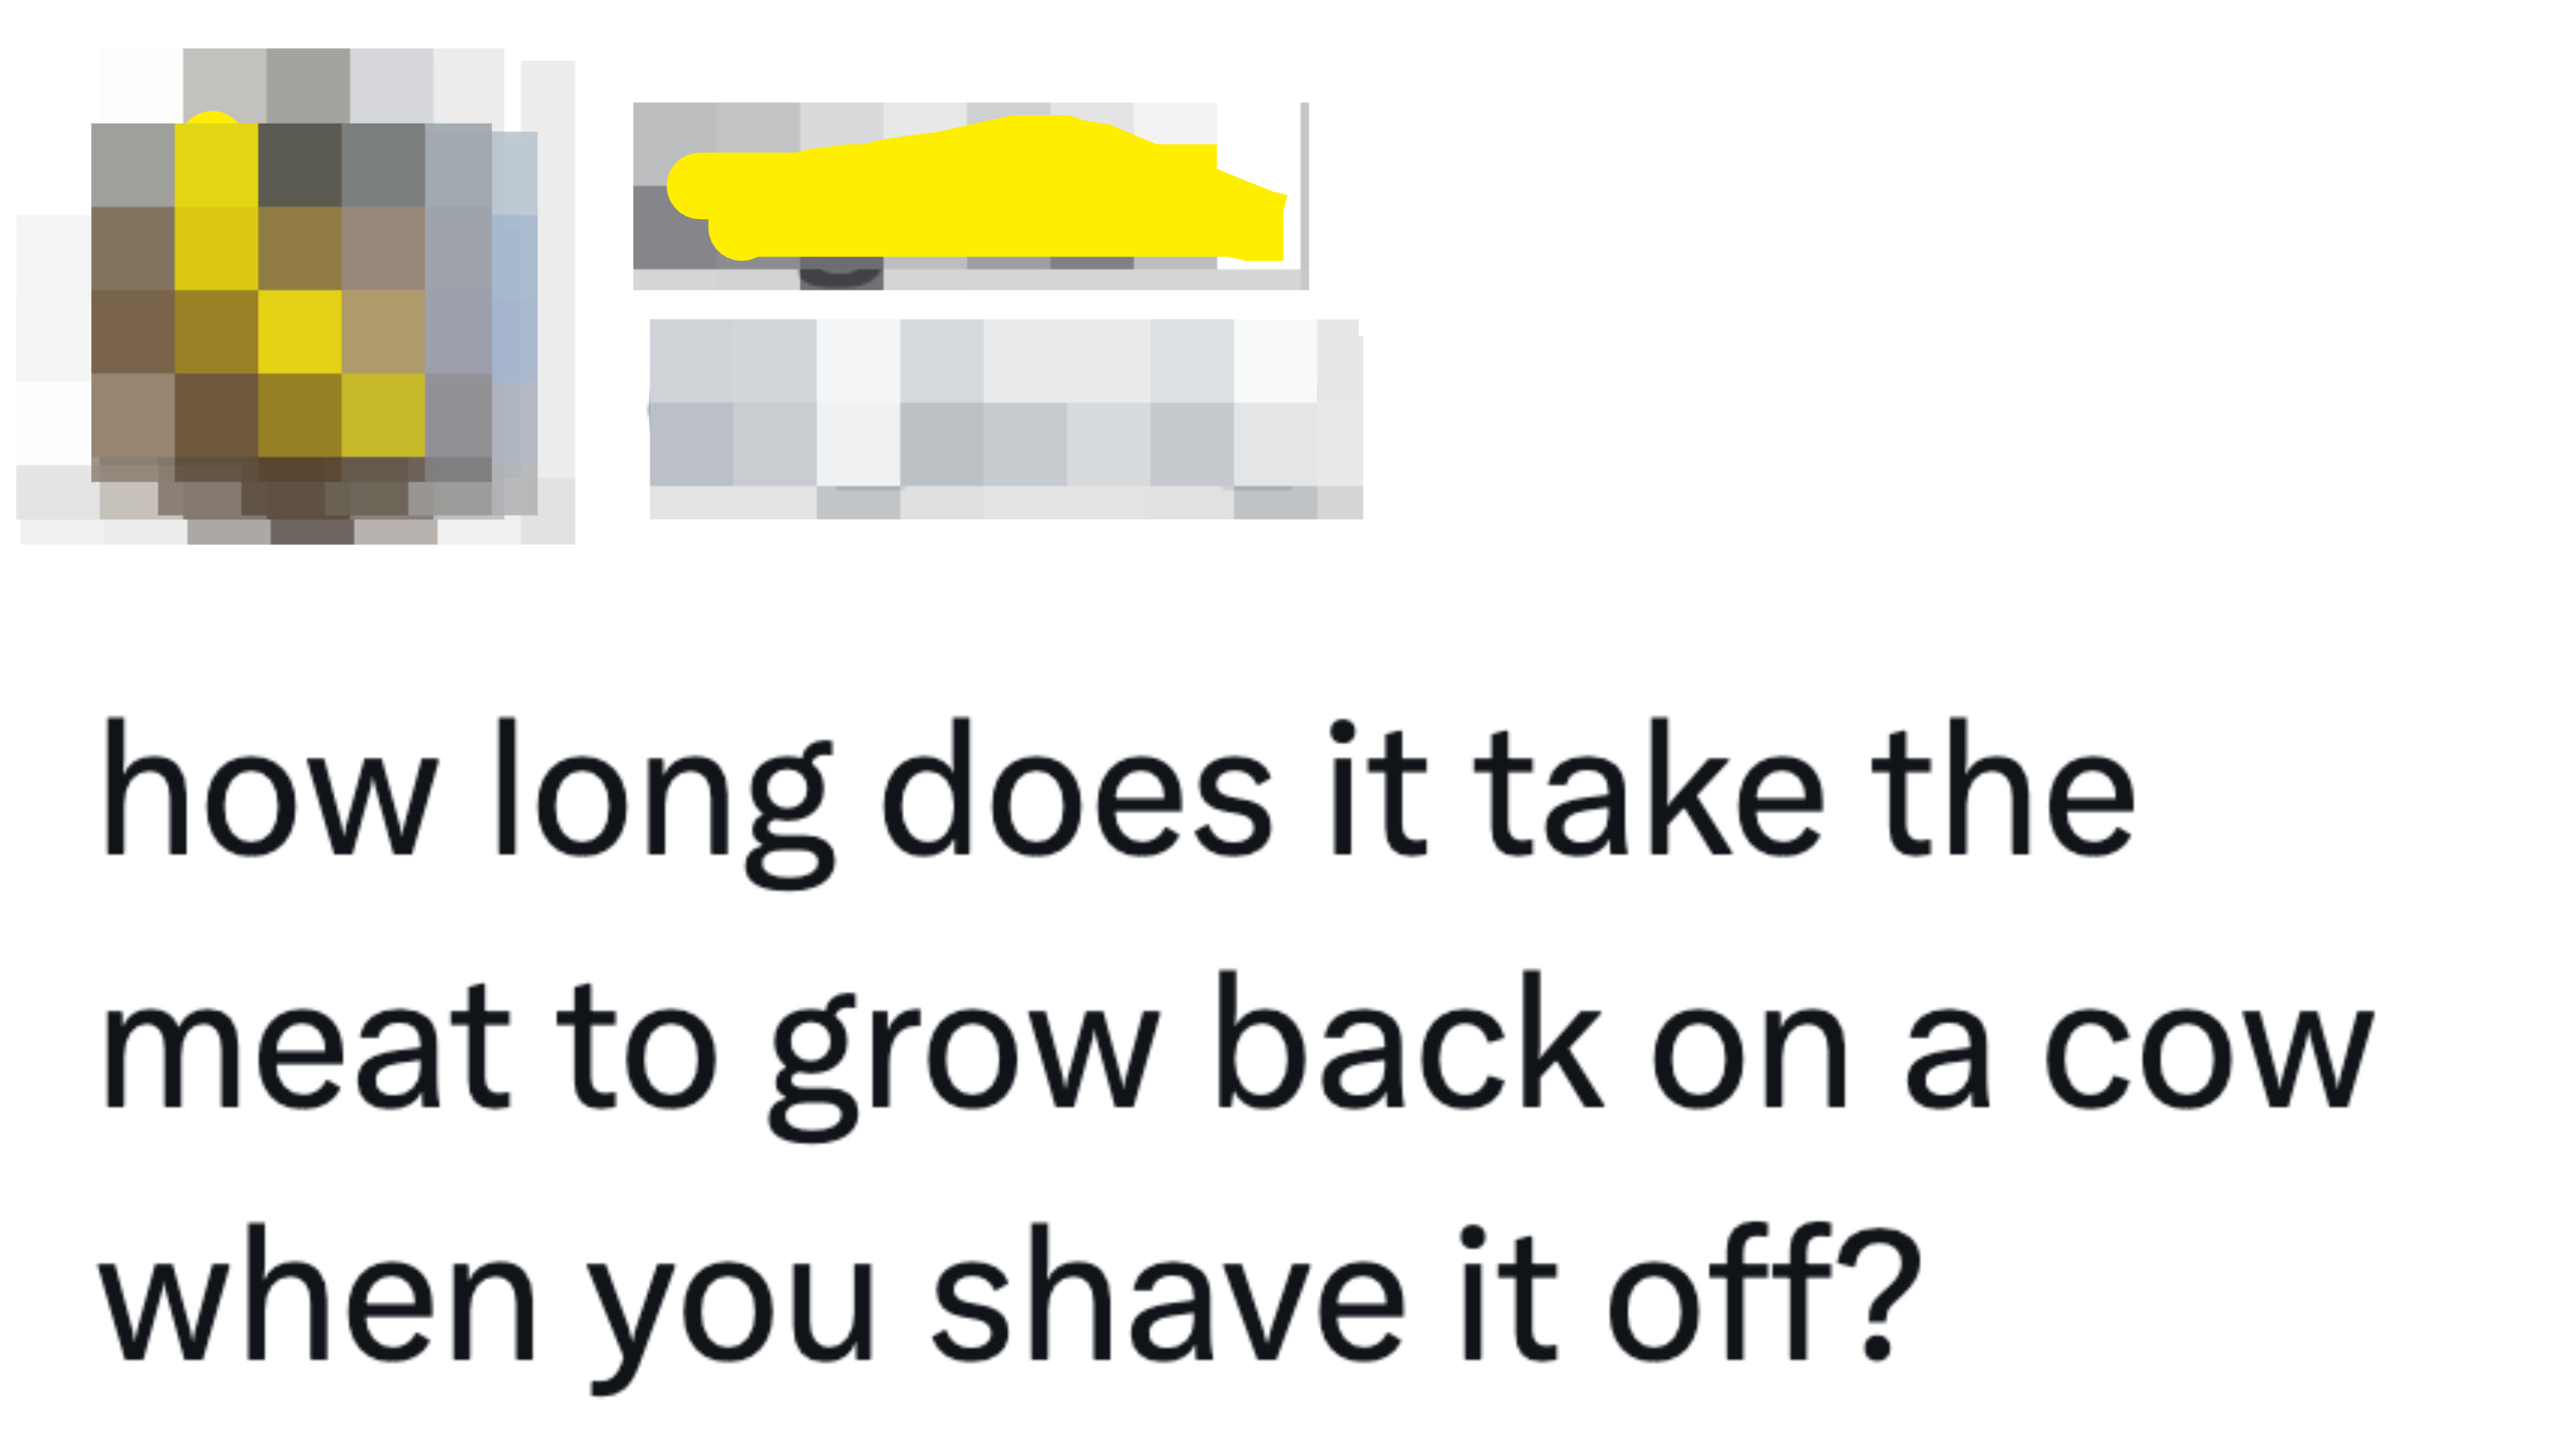 &quot;How long does it take the meat to grow back on a cow when you shave it off?&quot;